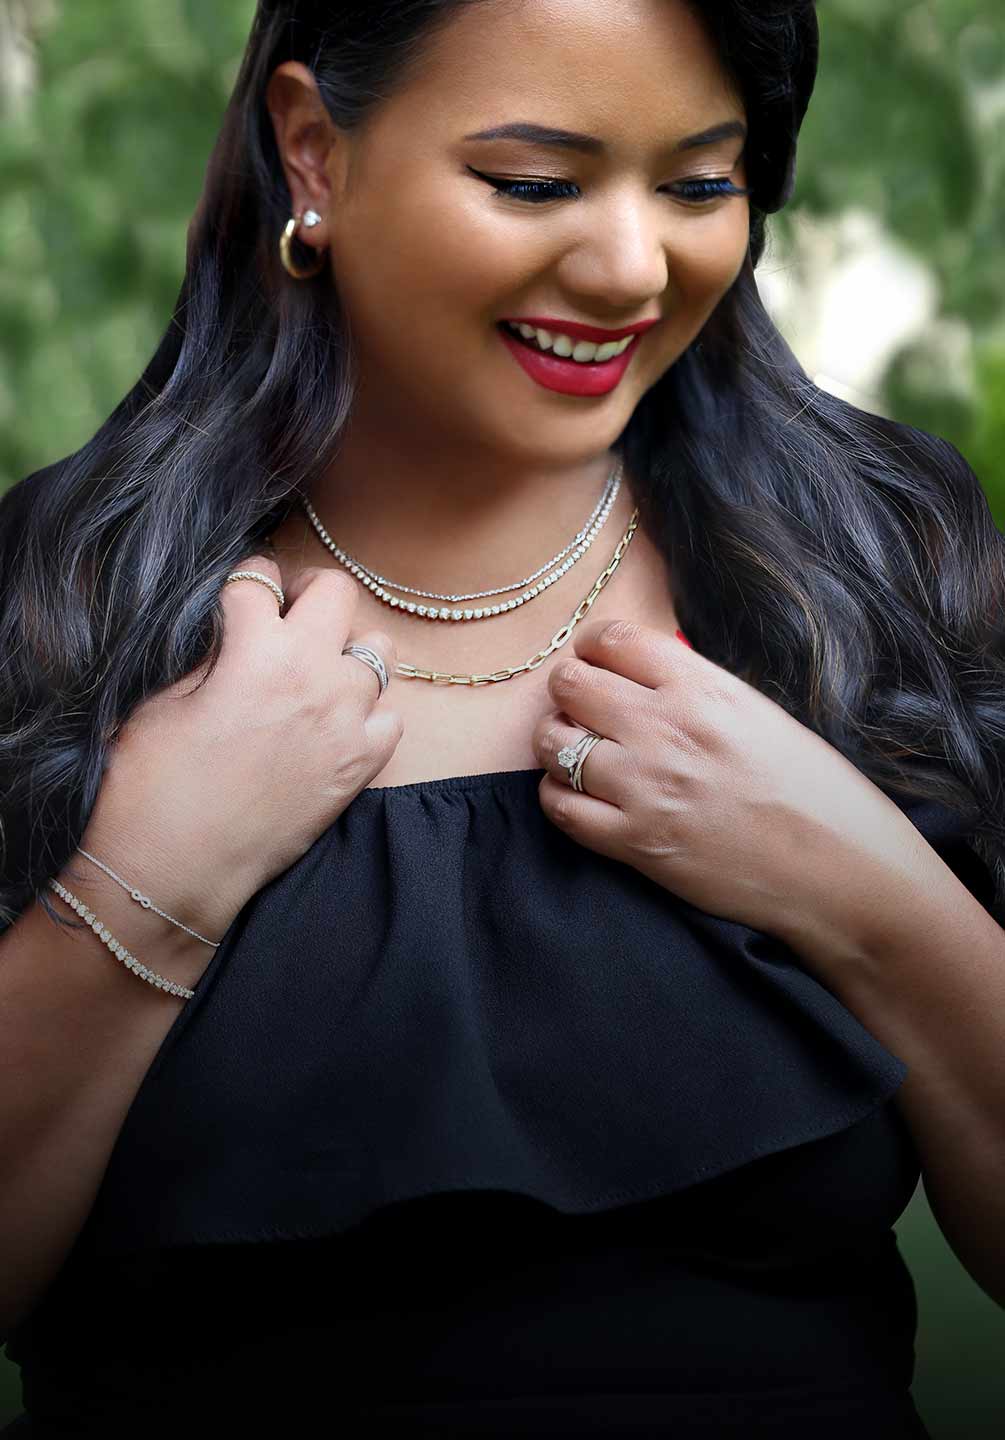 Picture of a beautiful woman wearing a layered selection of necklaces. Links to treat yourself gift ideas